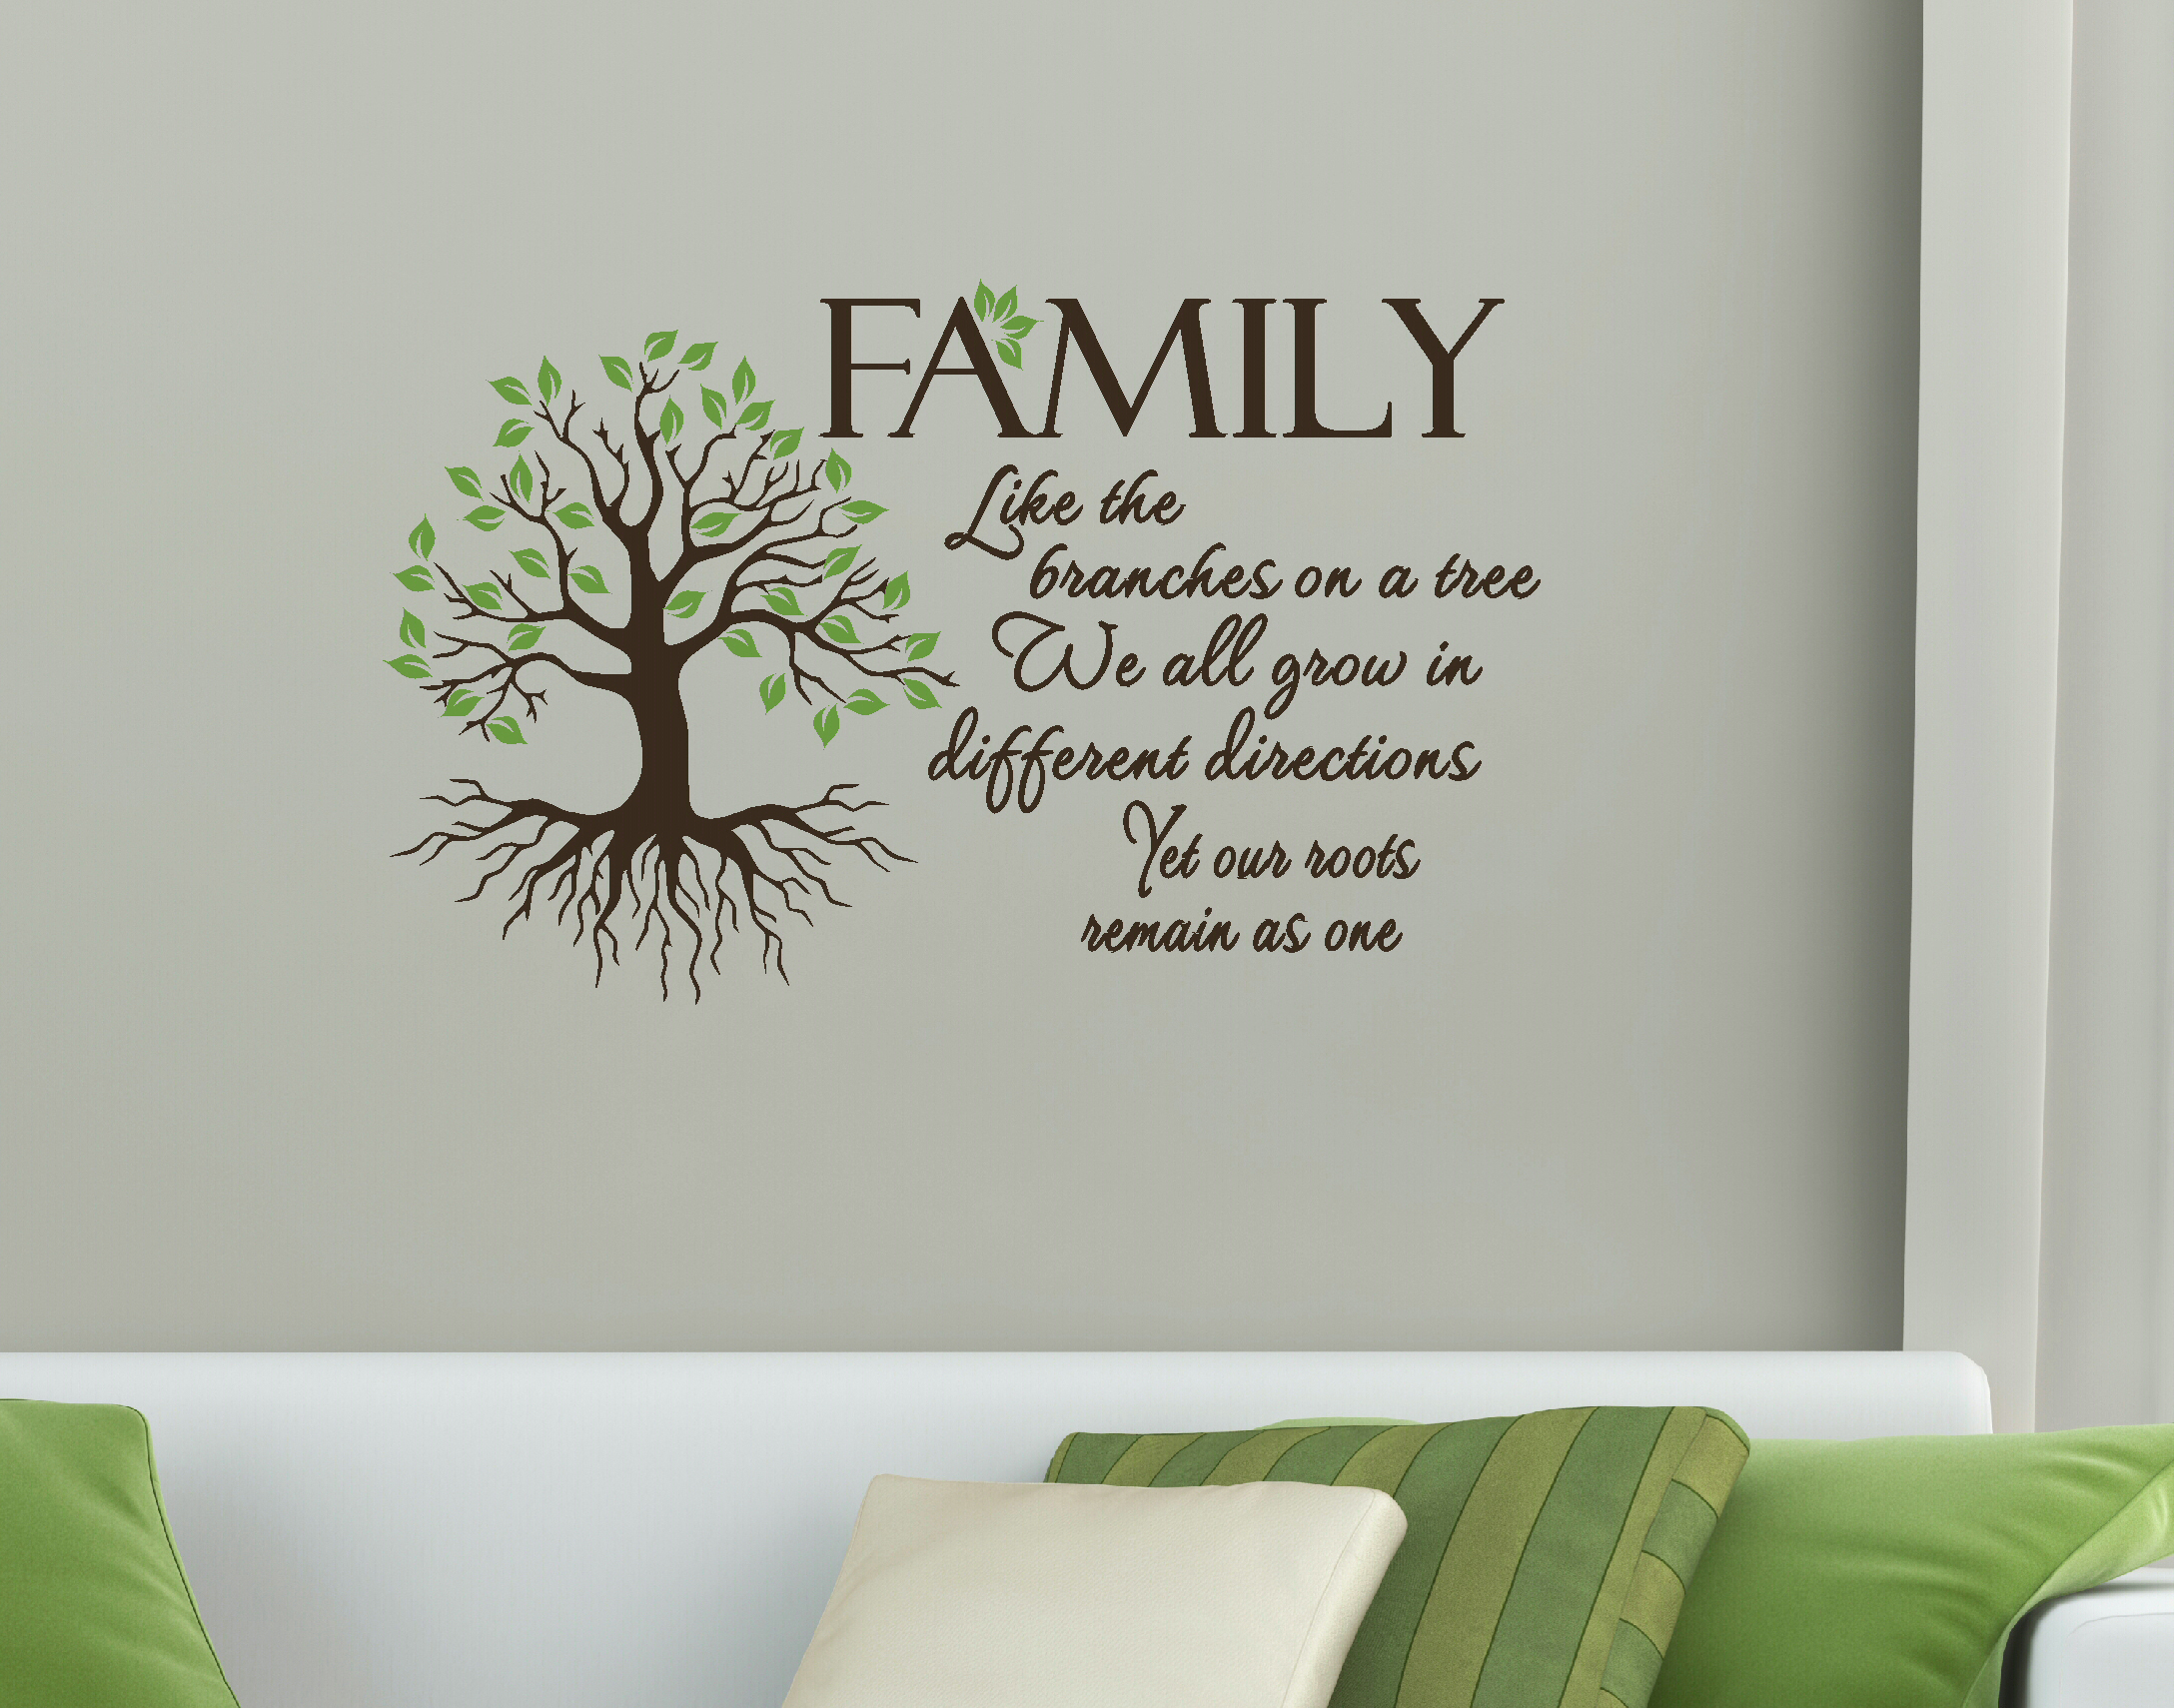 WD475 Wall Decal Sticker Like the branches on a tree, we all grow in different directions yet our roots remain as one.